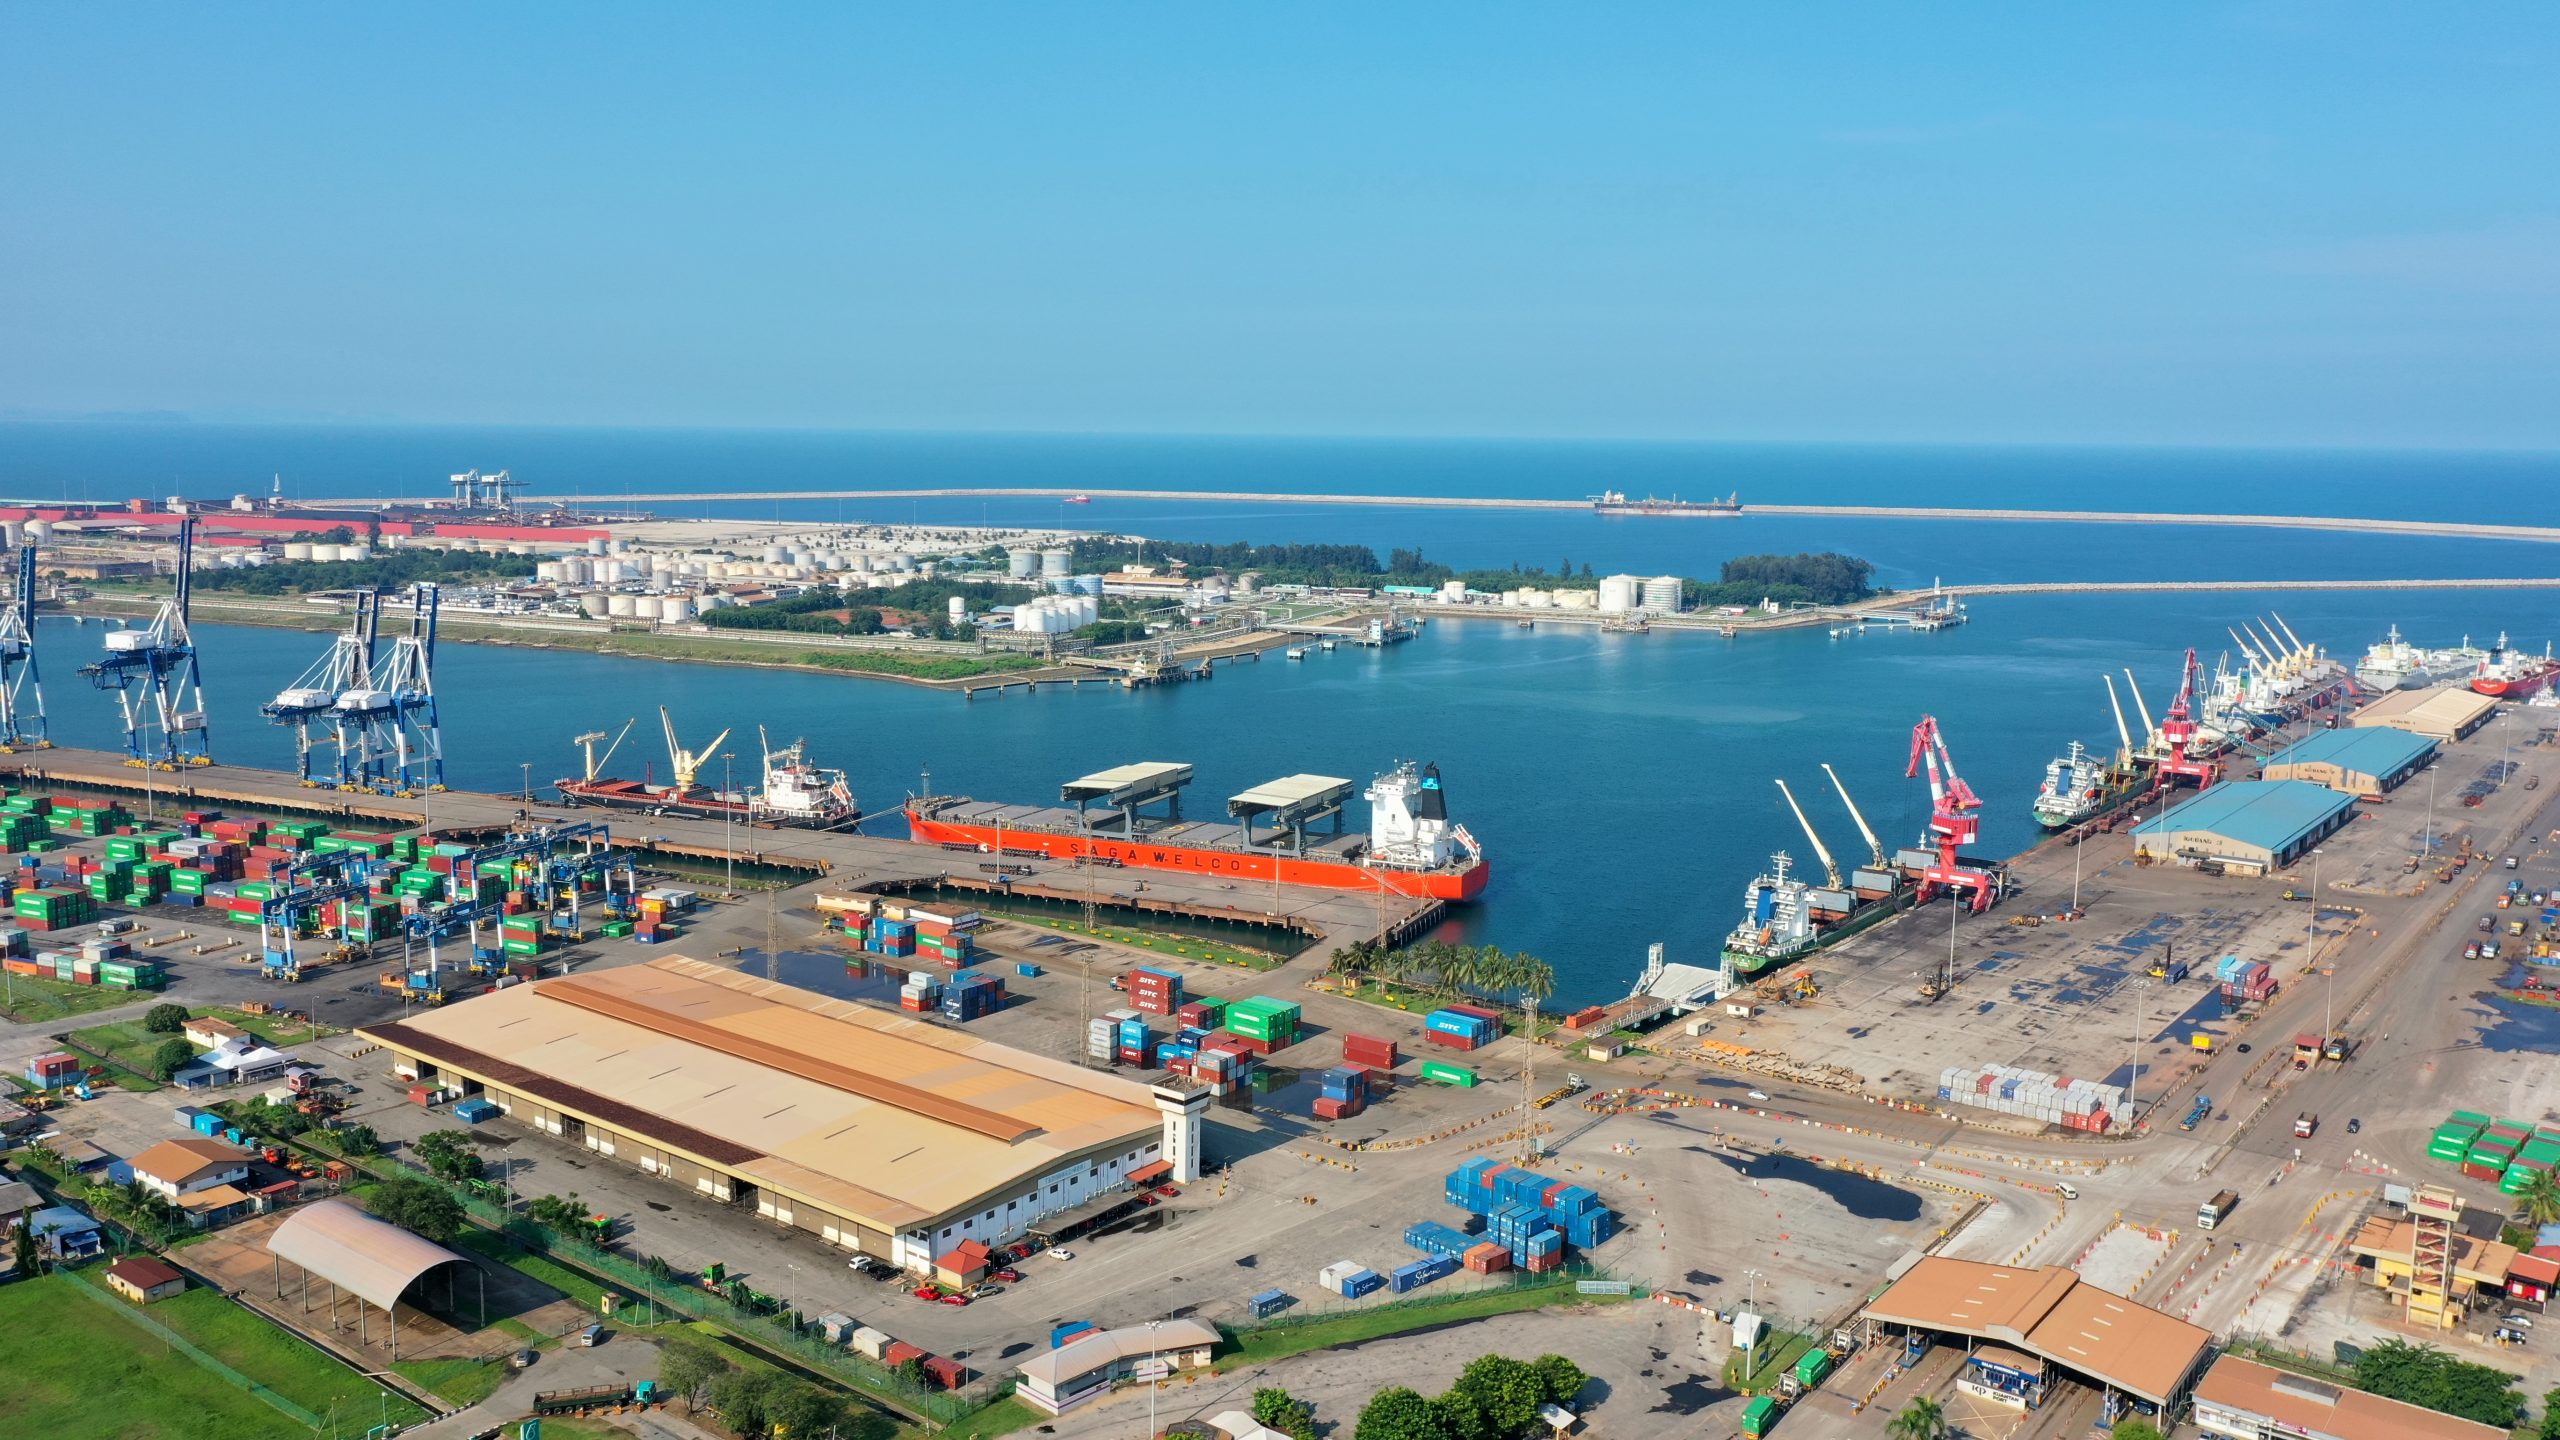 Kuantan Port embarks on green journey to unlock commercial potential